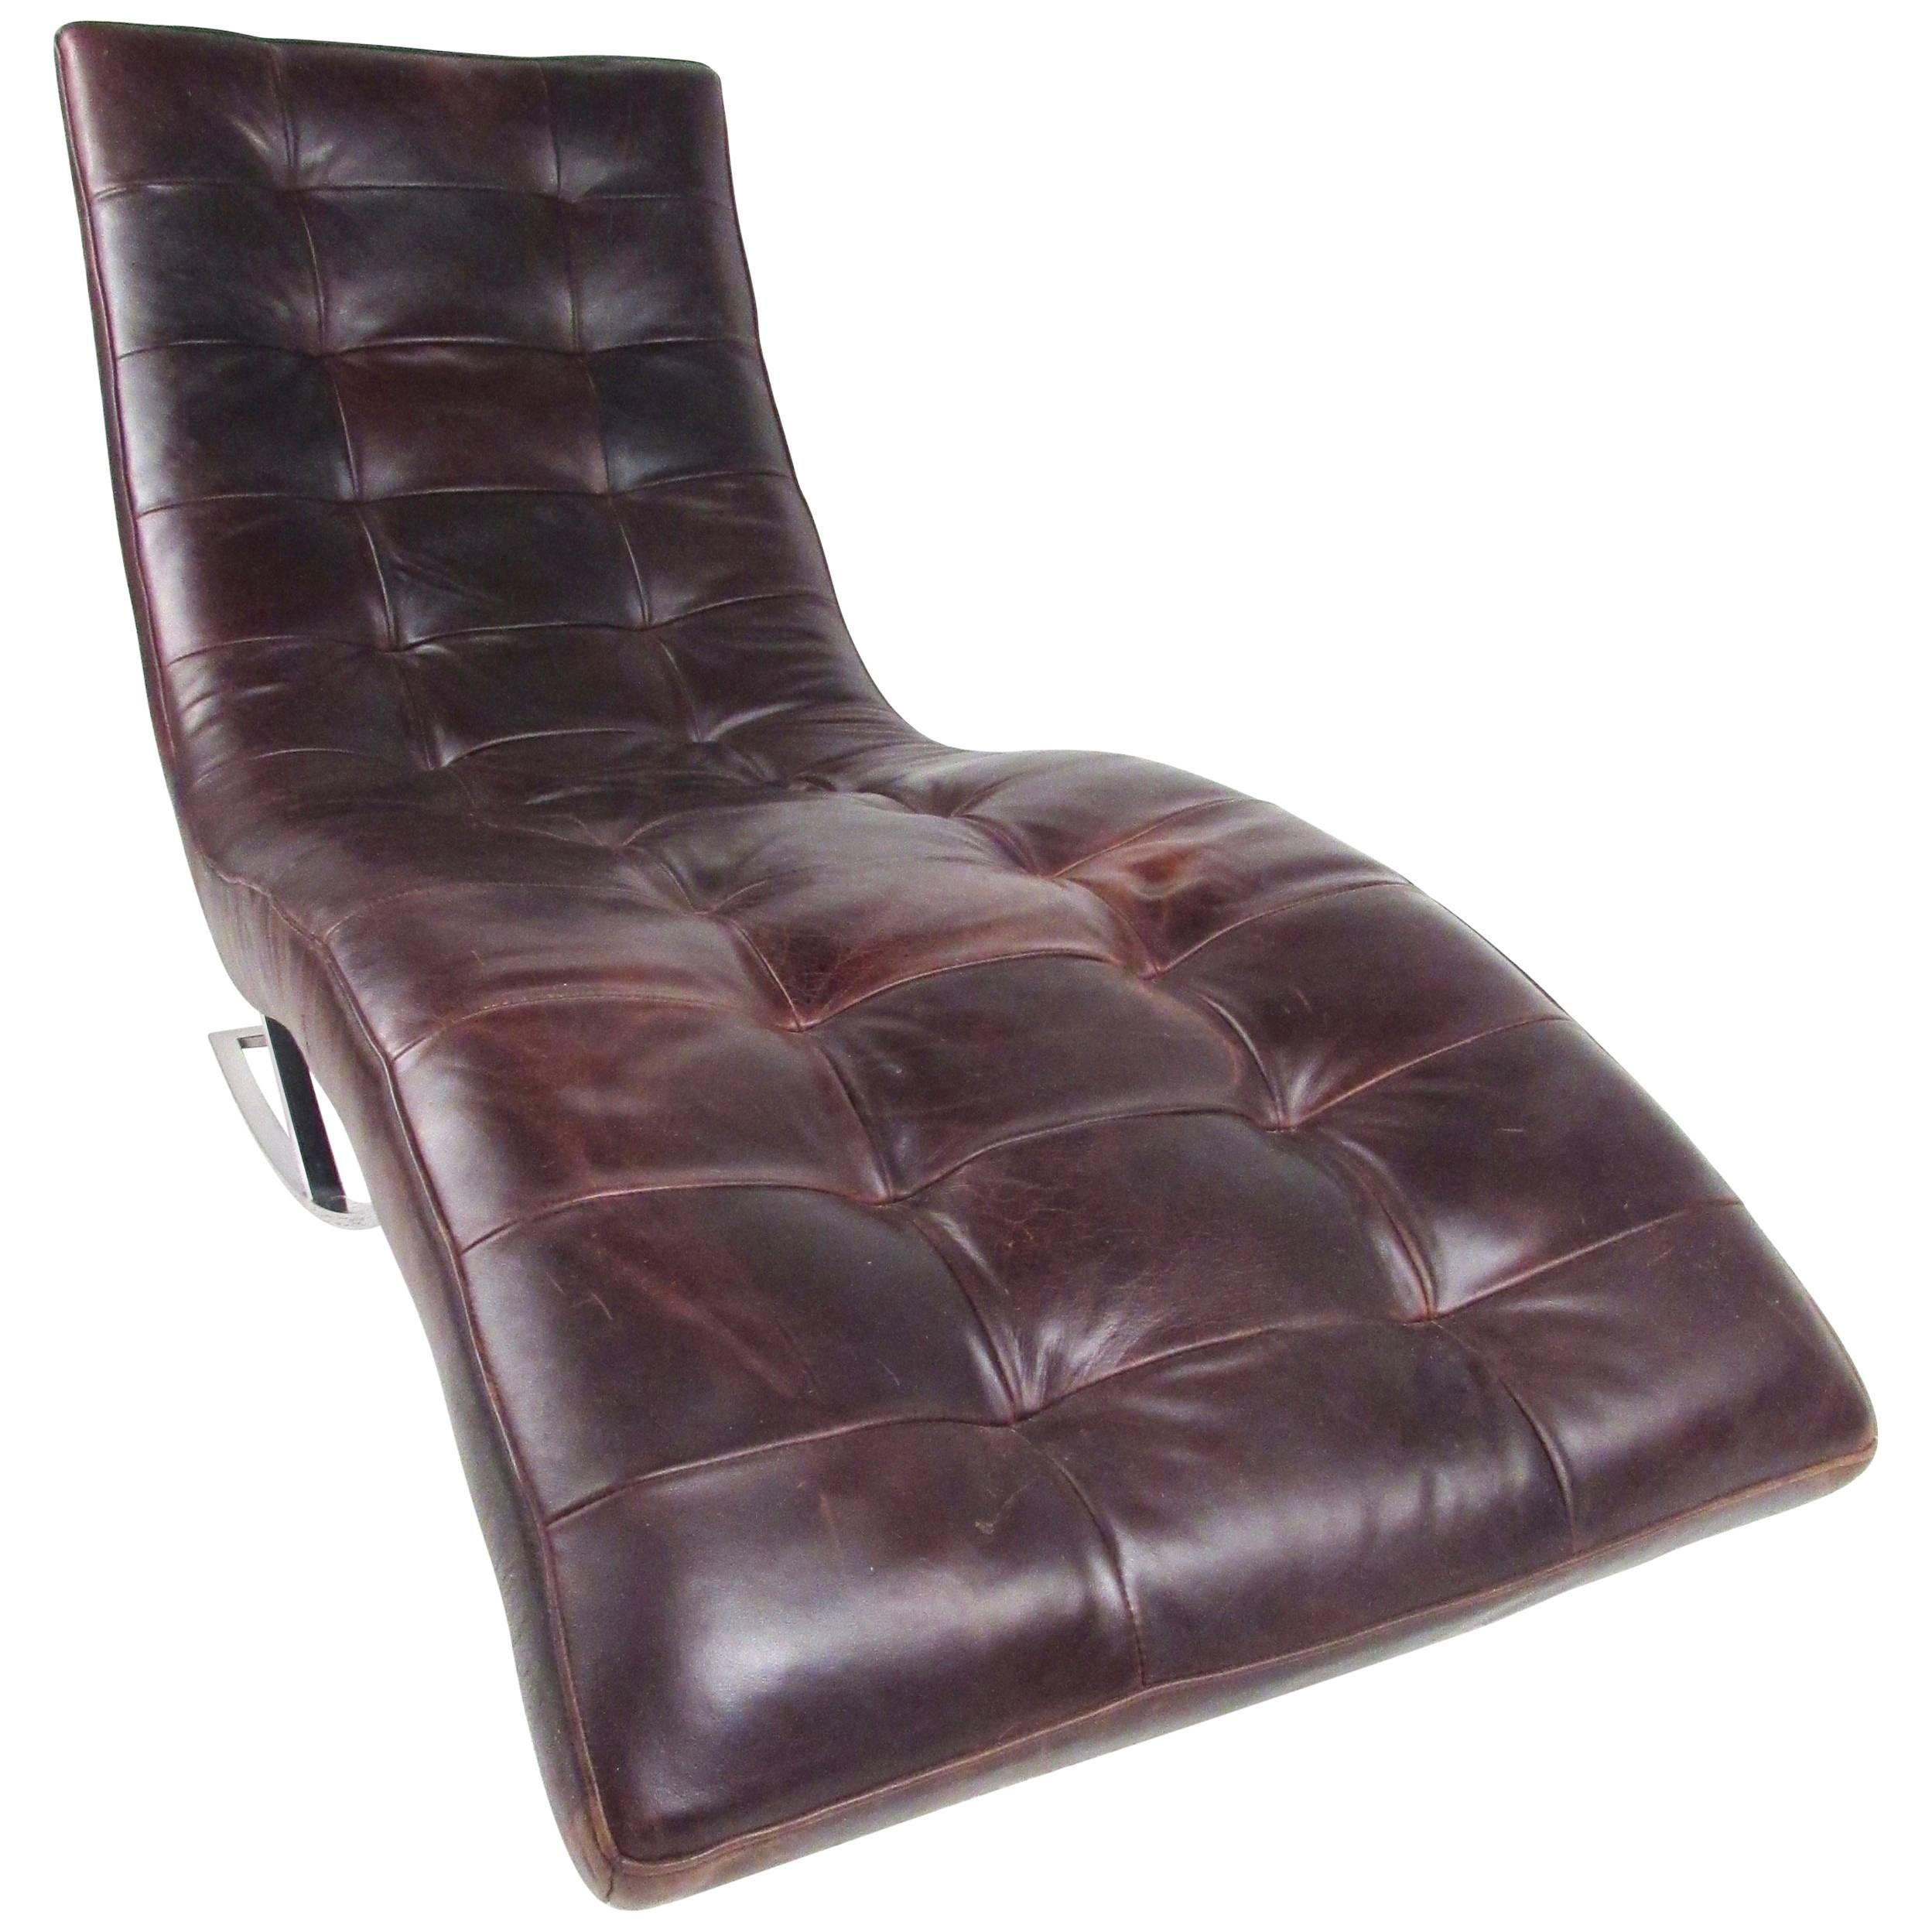 Modern Chaise Longue Chair in Brown Leather